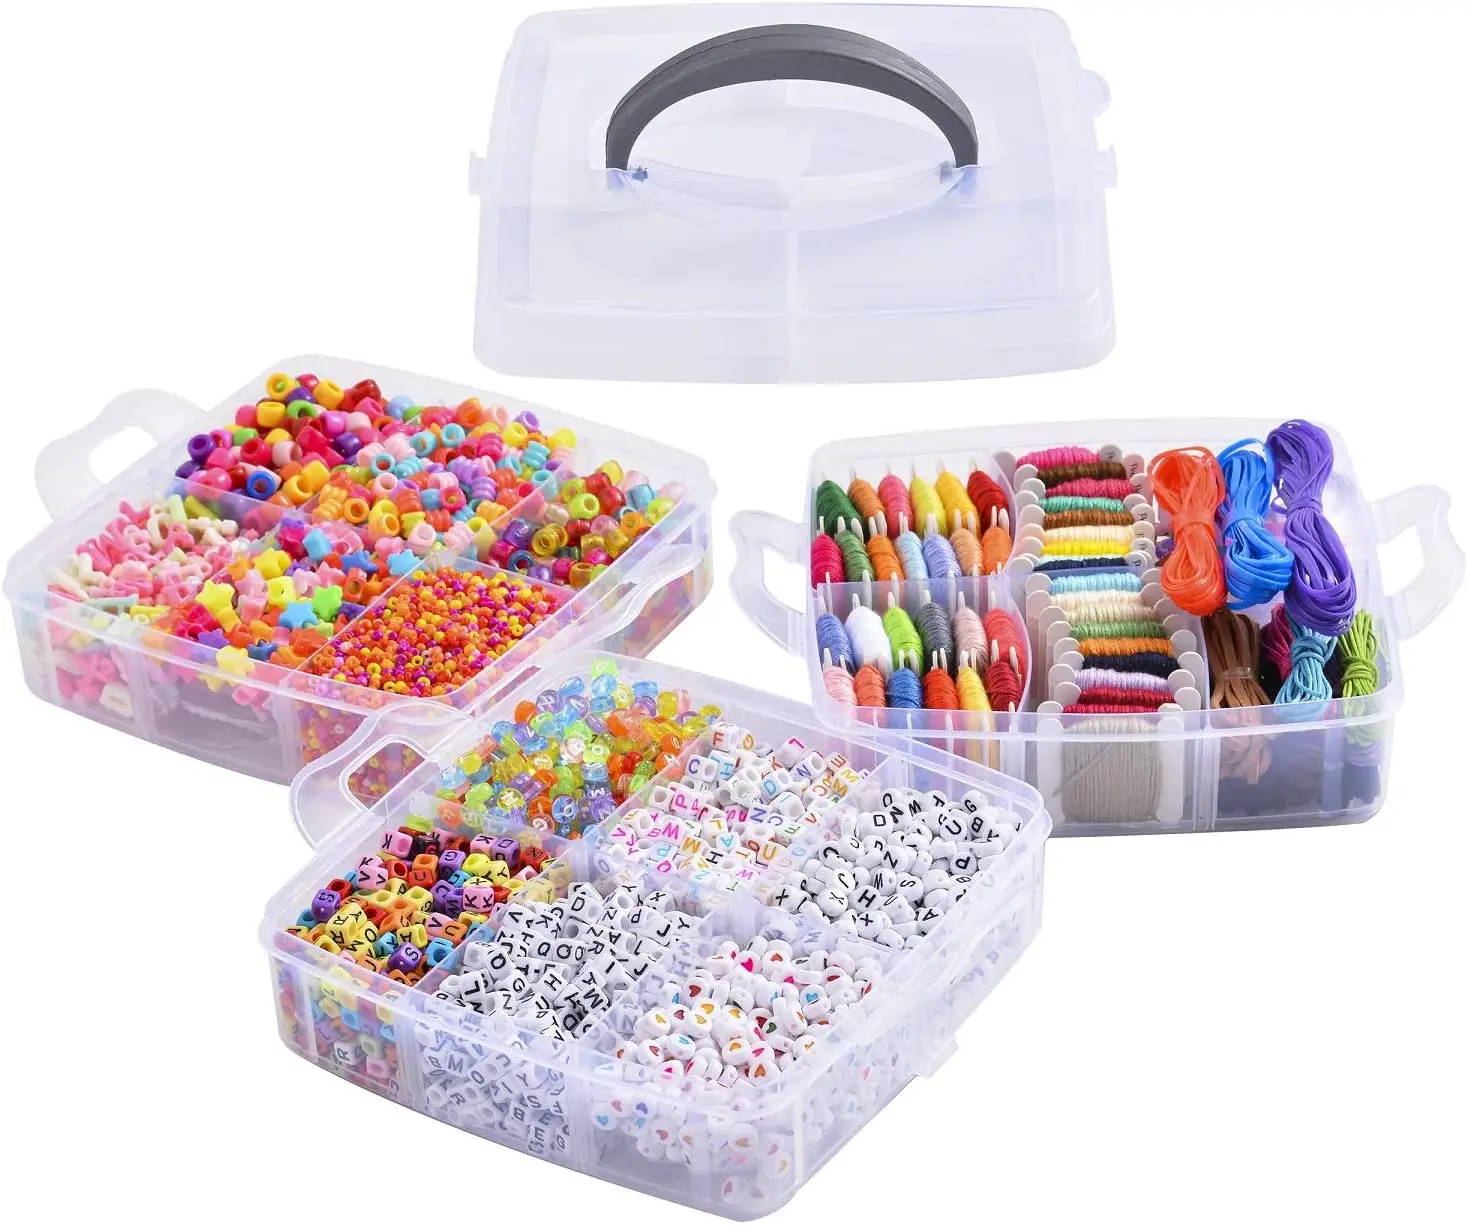 3 layer container box packing for luxury plastic pony beads set with embroidery thread for kids jewelry making supply kit